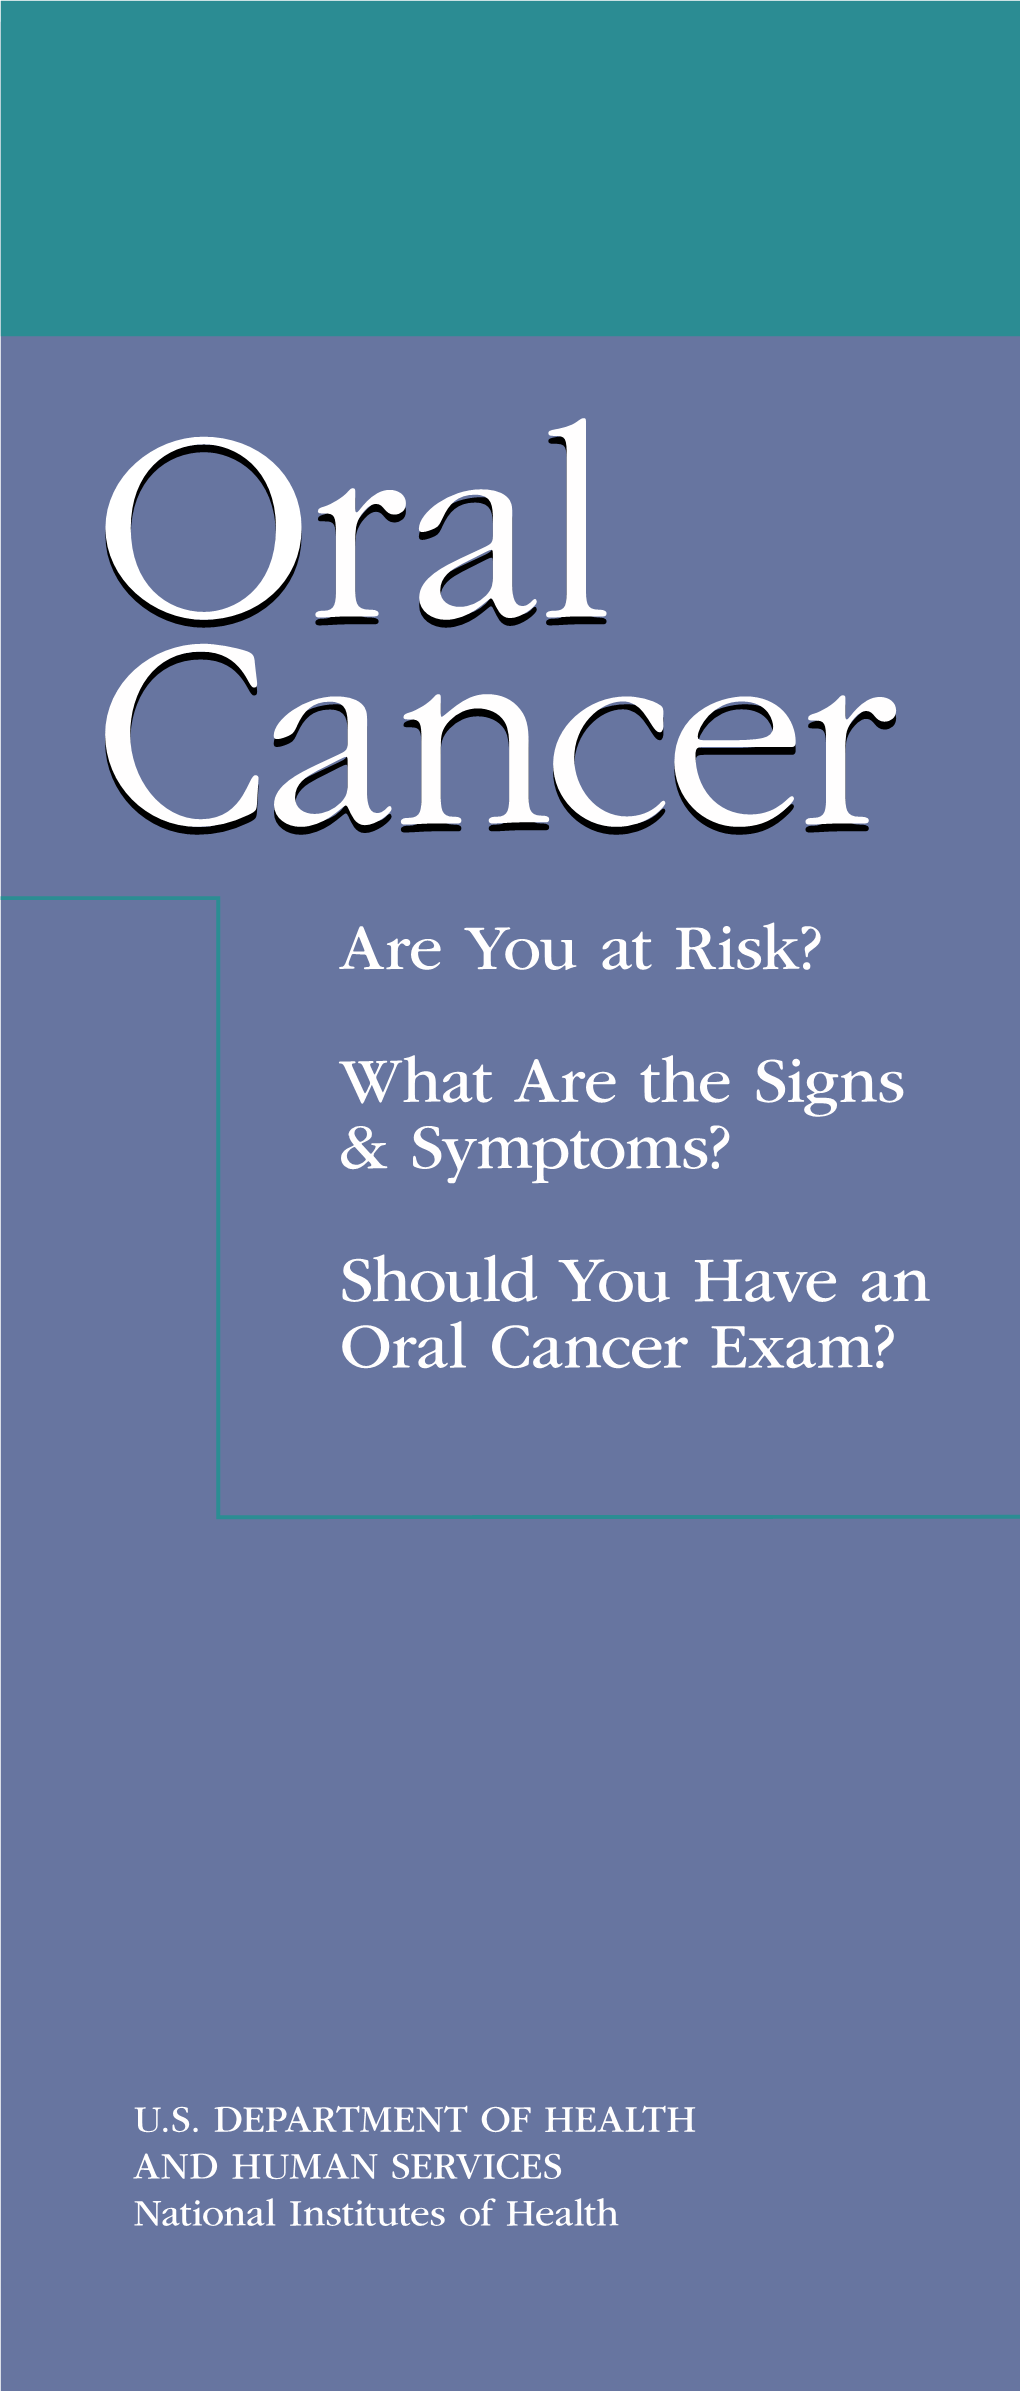 Oral Cancer Are You at Risk? What Are the Signs & Symptoms? Should You Have an Oral Cancer Exam?